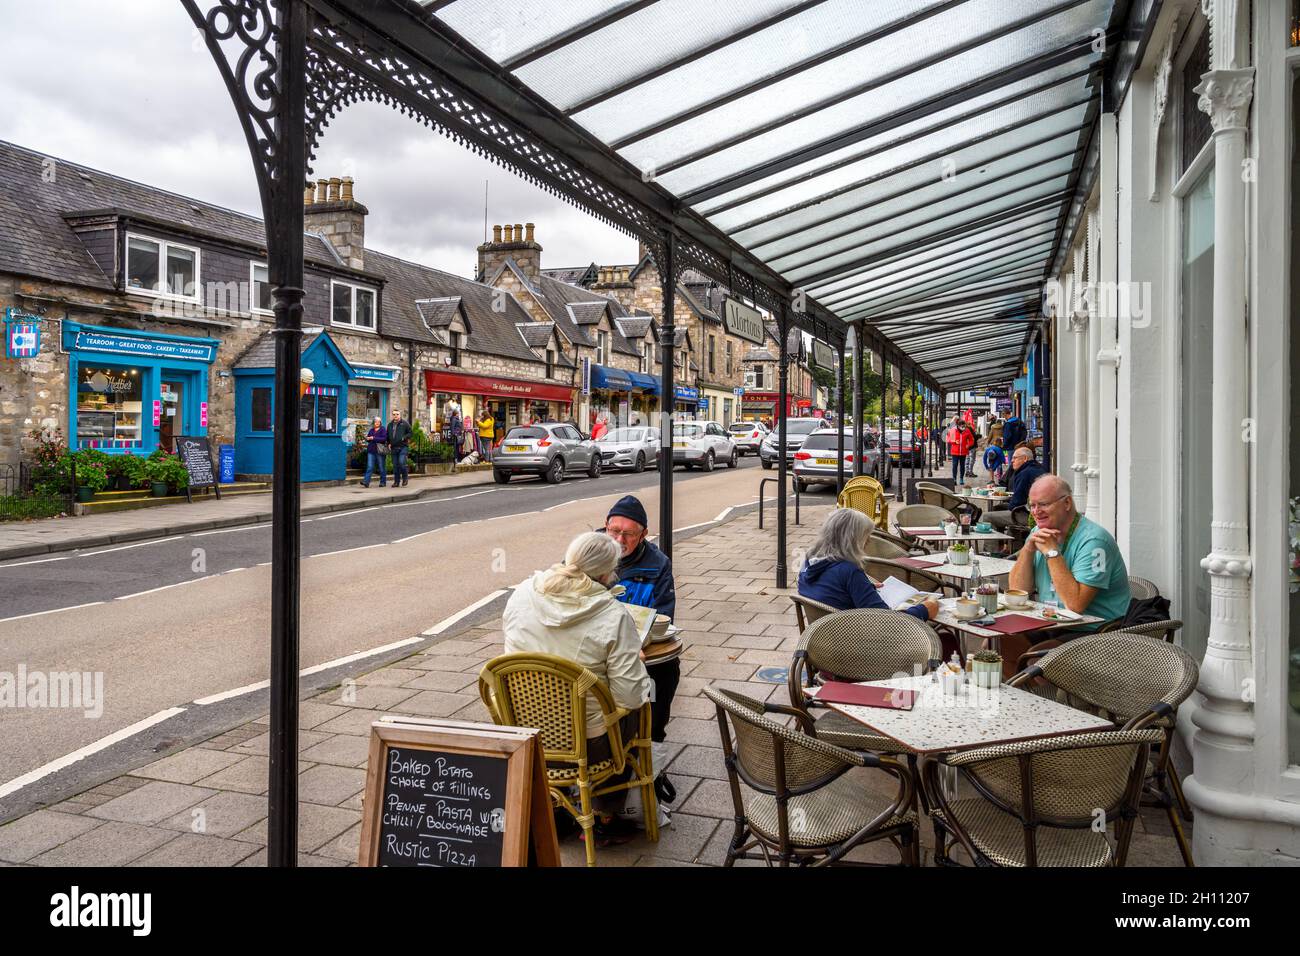 Cafe on the High Street (Atholl Road), Pitlochry, Scotland, UK Stock Photo